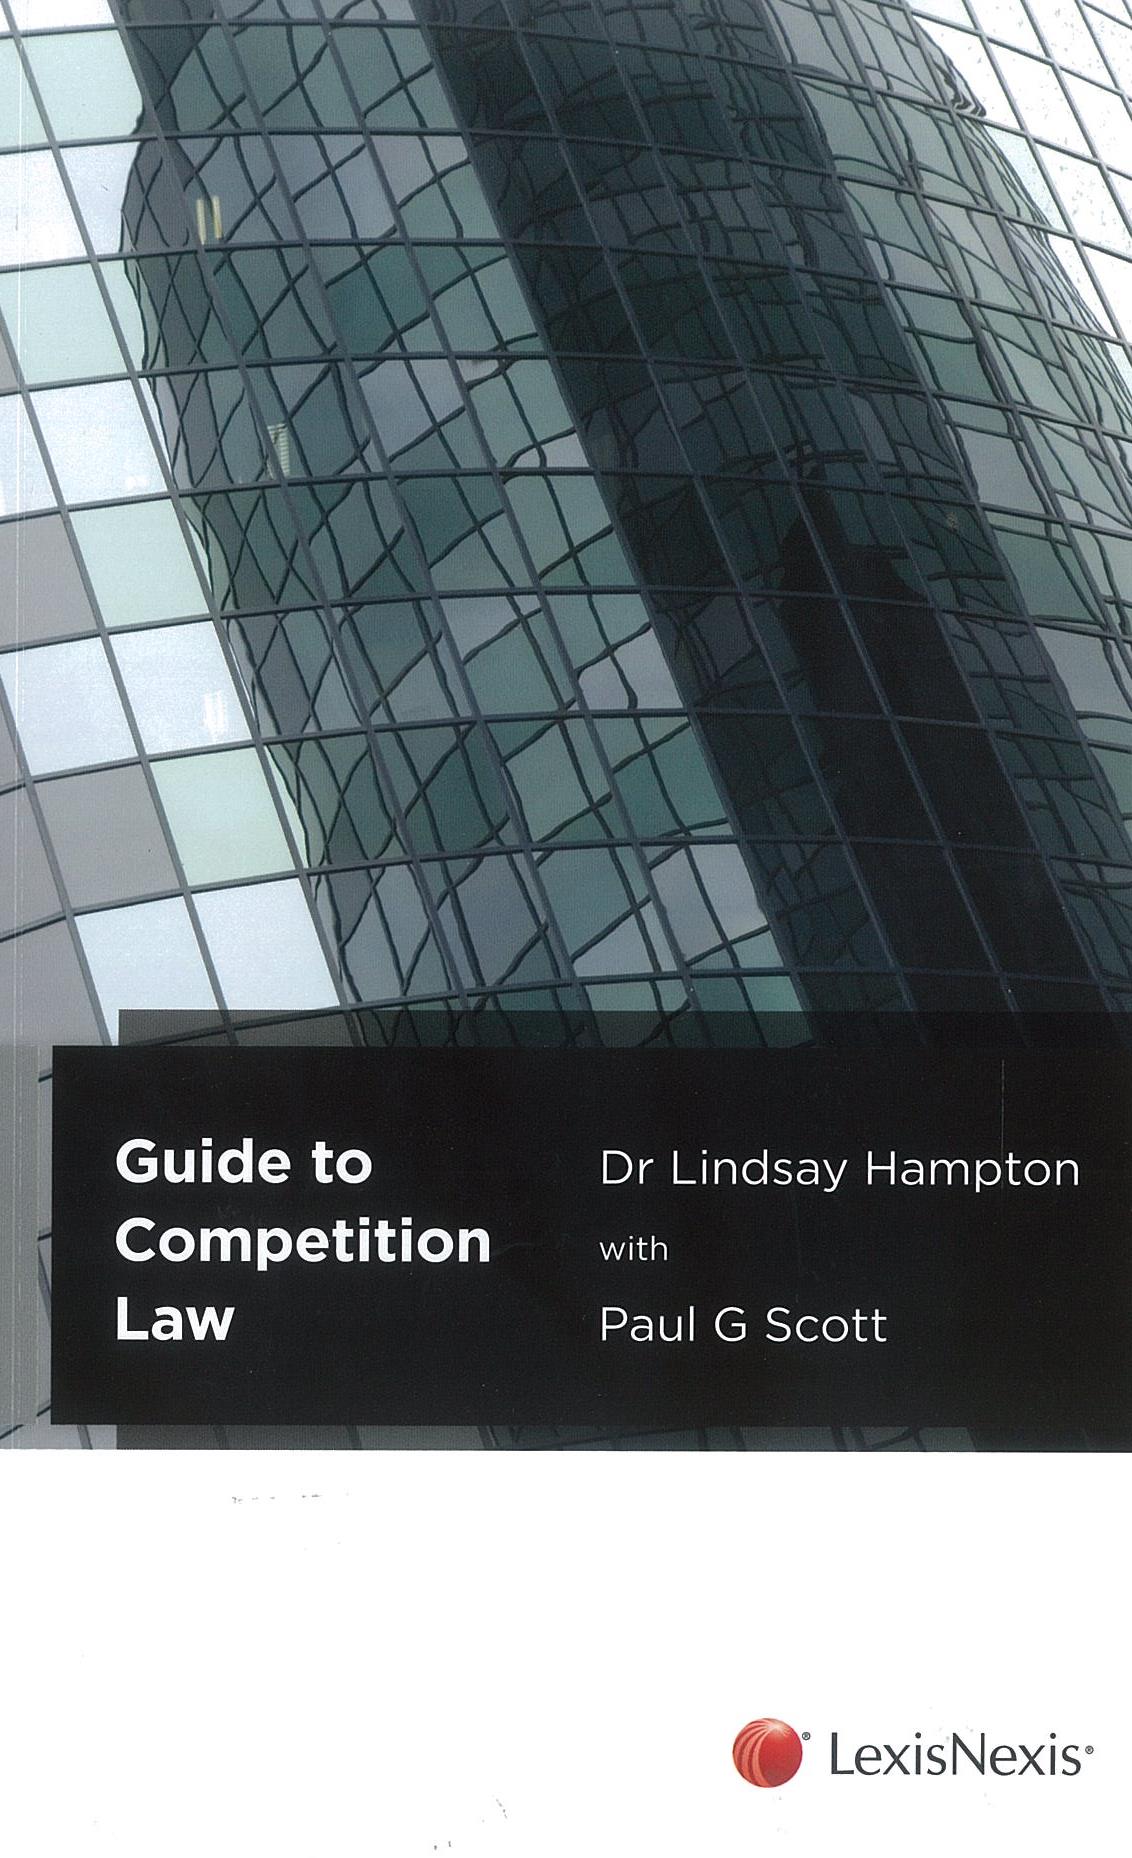 GuidetoCompetitionLaw